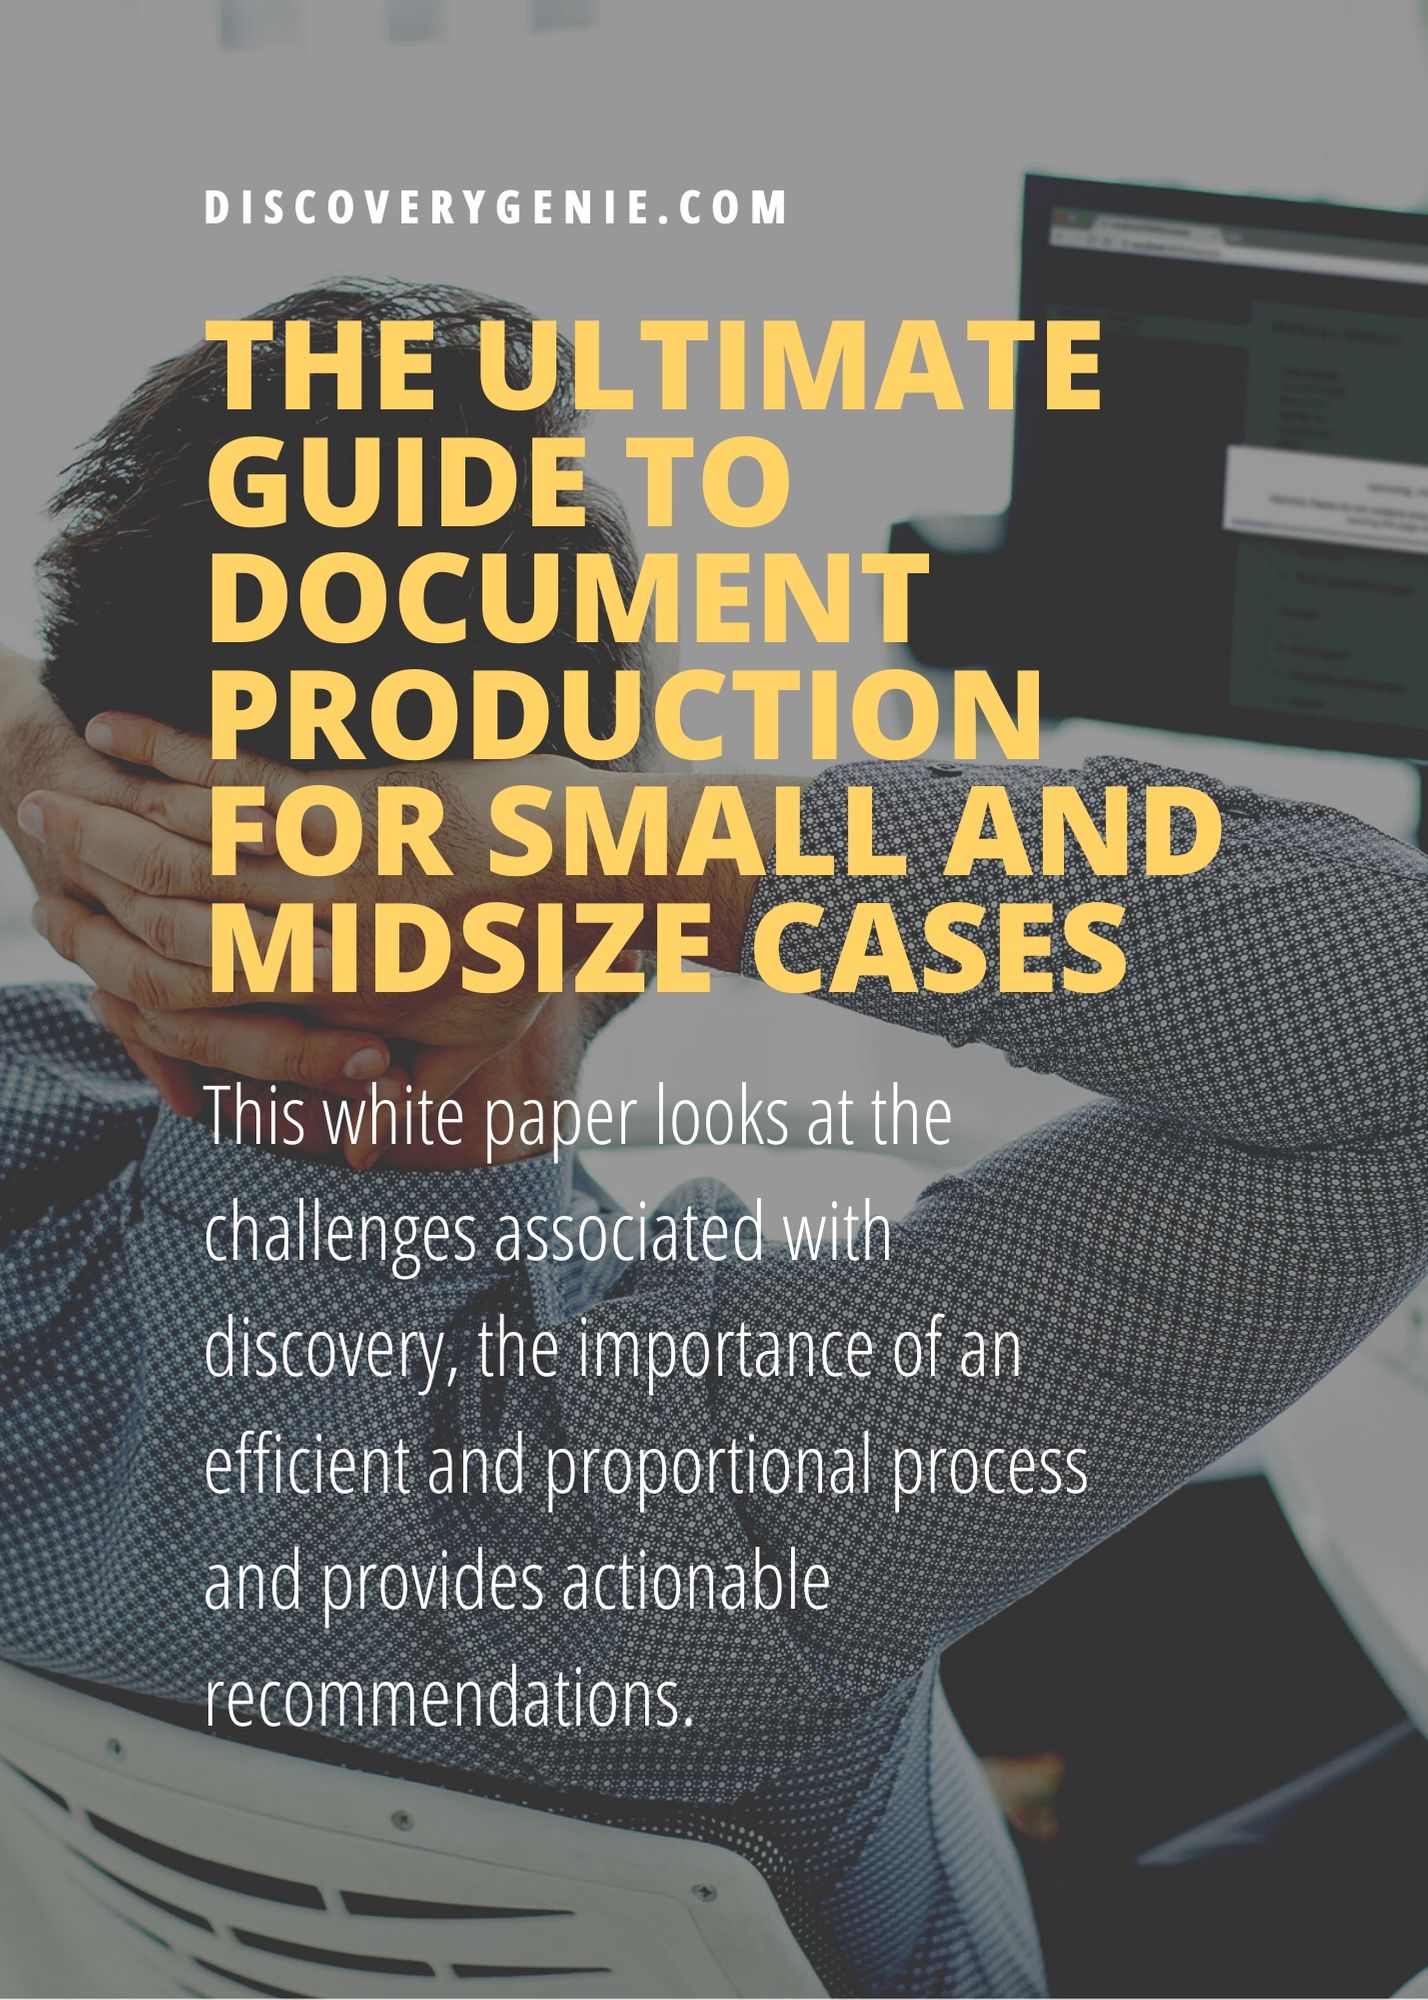 The Ultimate Guide to Document Production